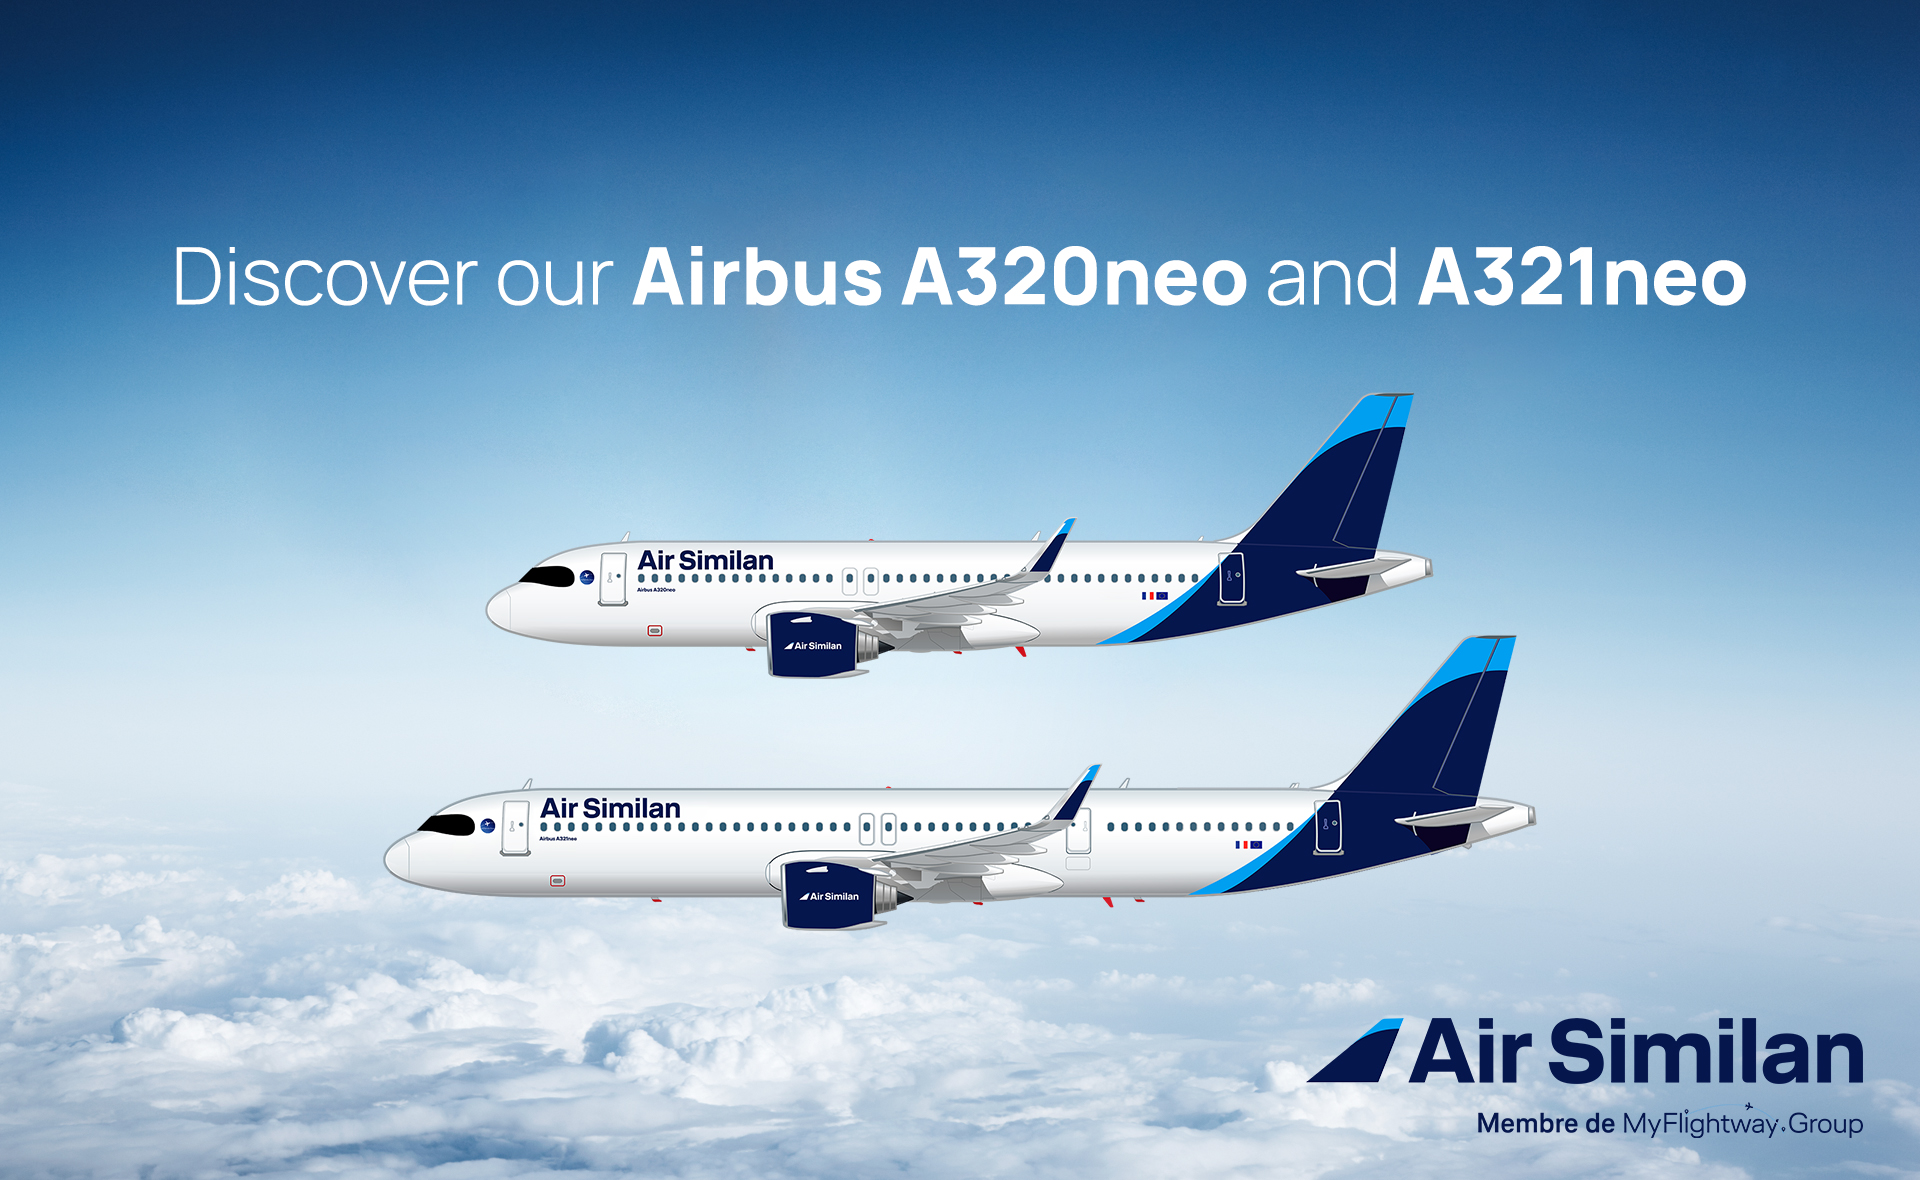 Air Similan orders 4 additional A320ceo and 4 737, and signs a letter of intent for A320neo, A321neo, 777 and 787